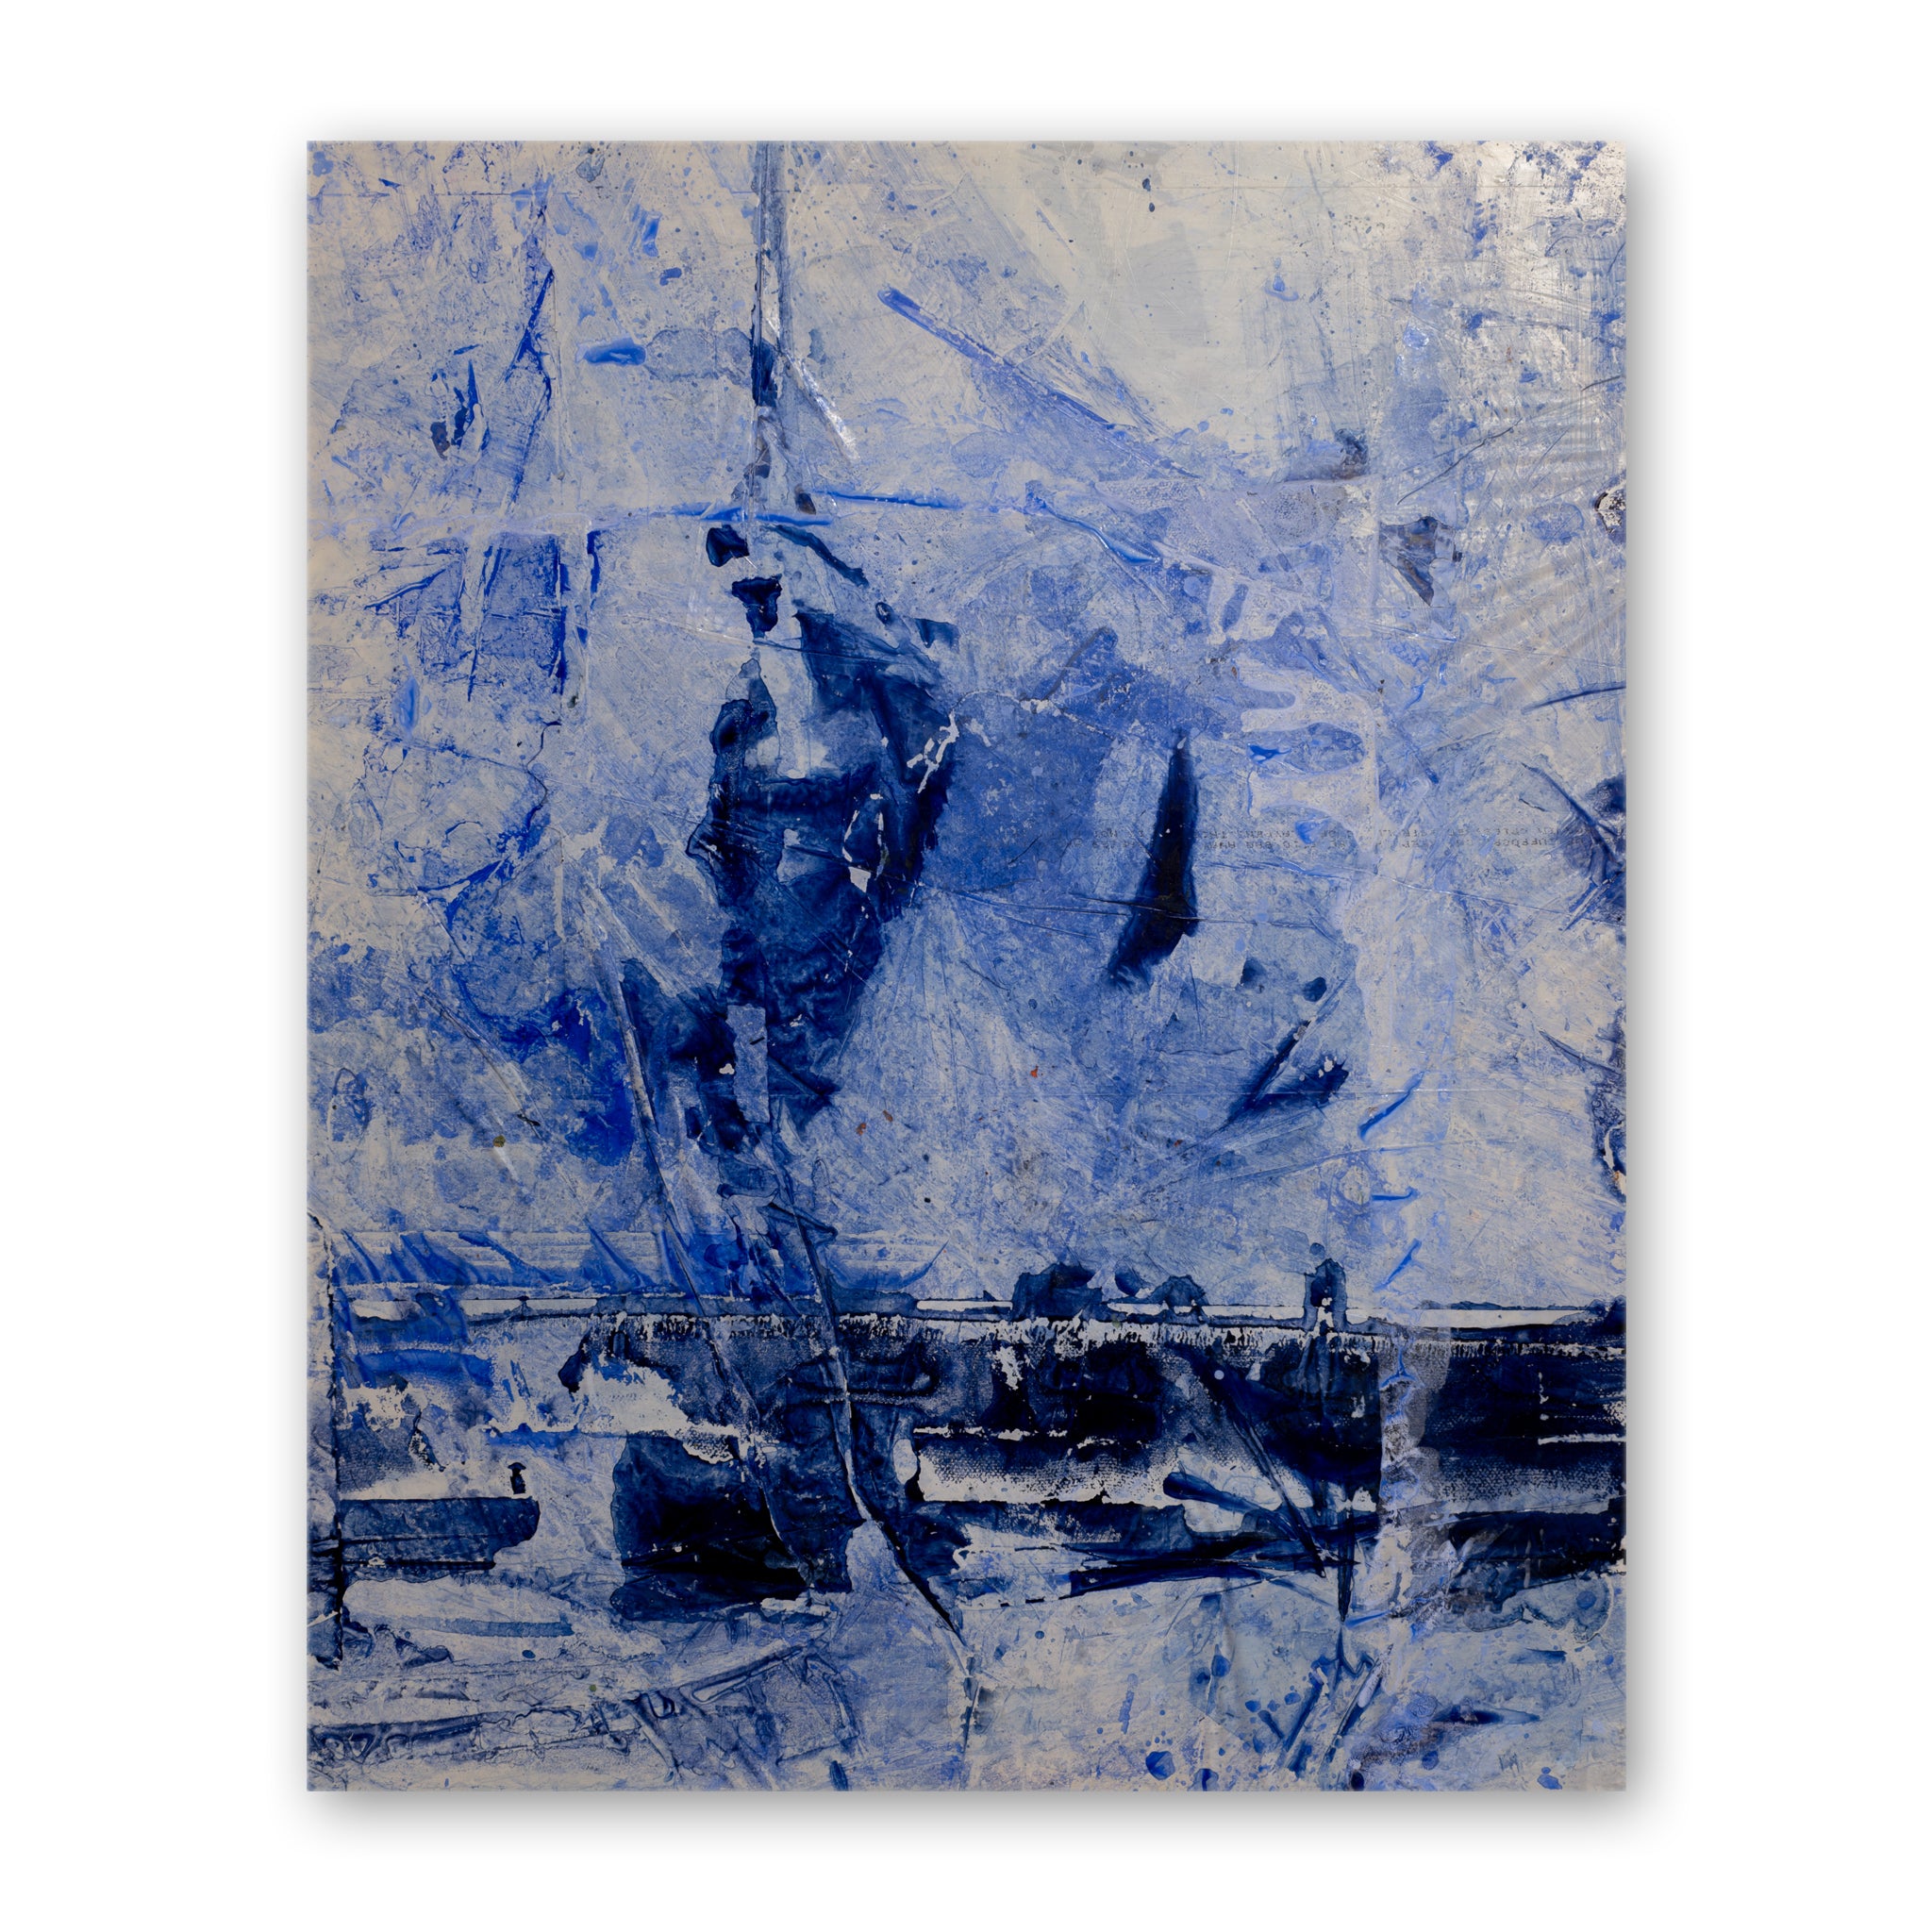 A blue abstract painting on a garbage bag